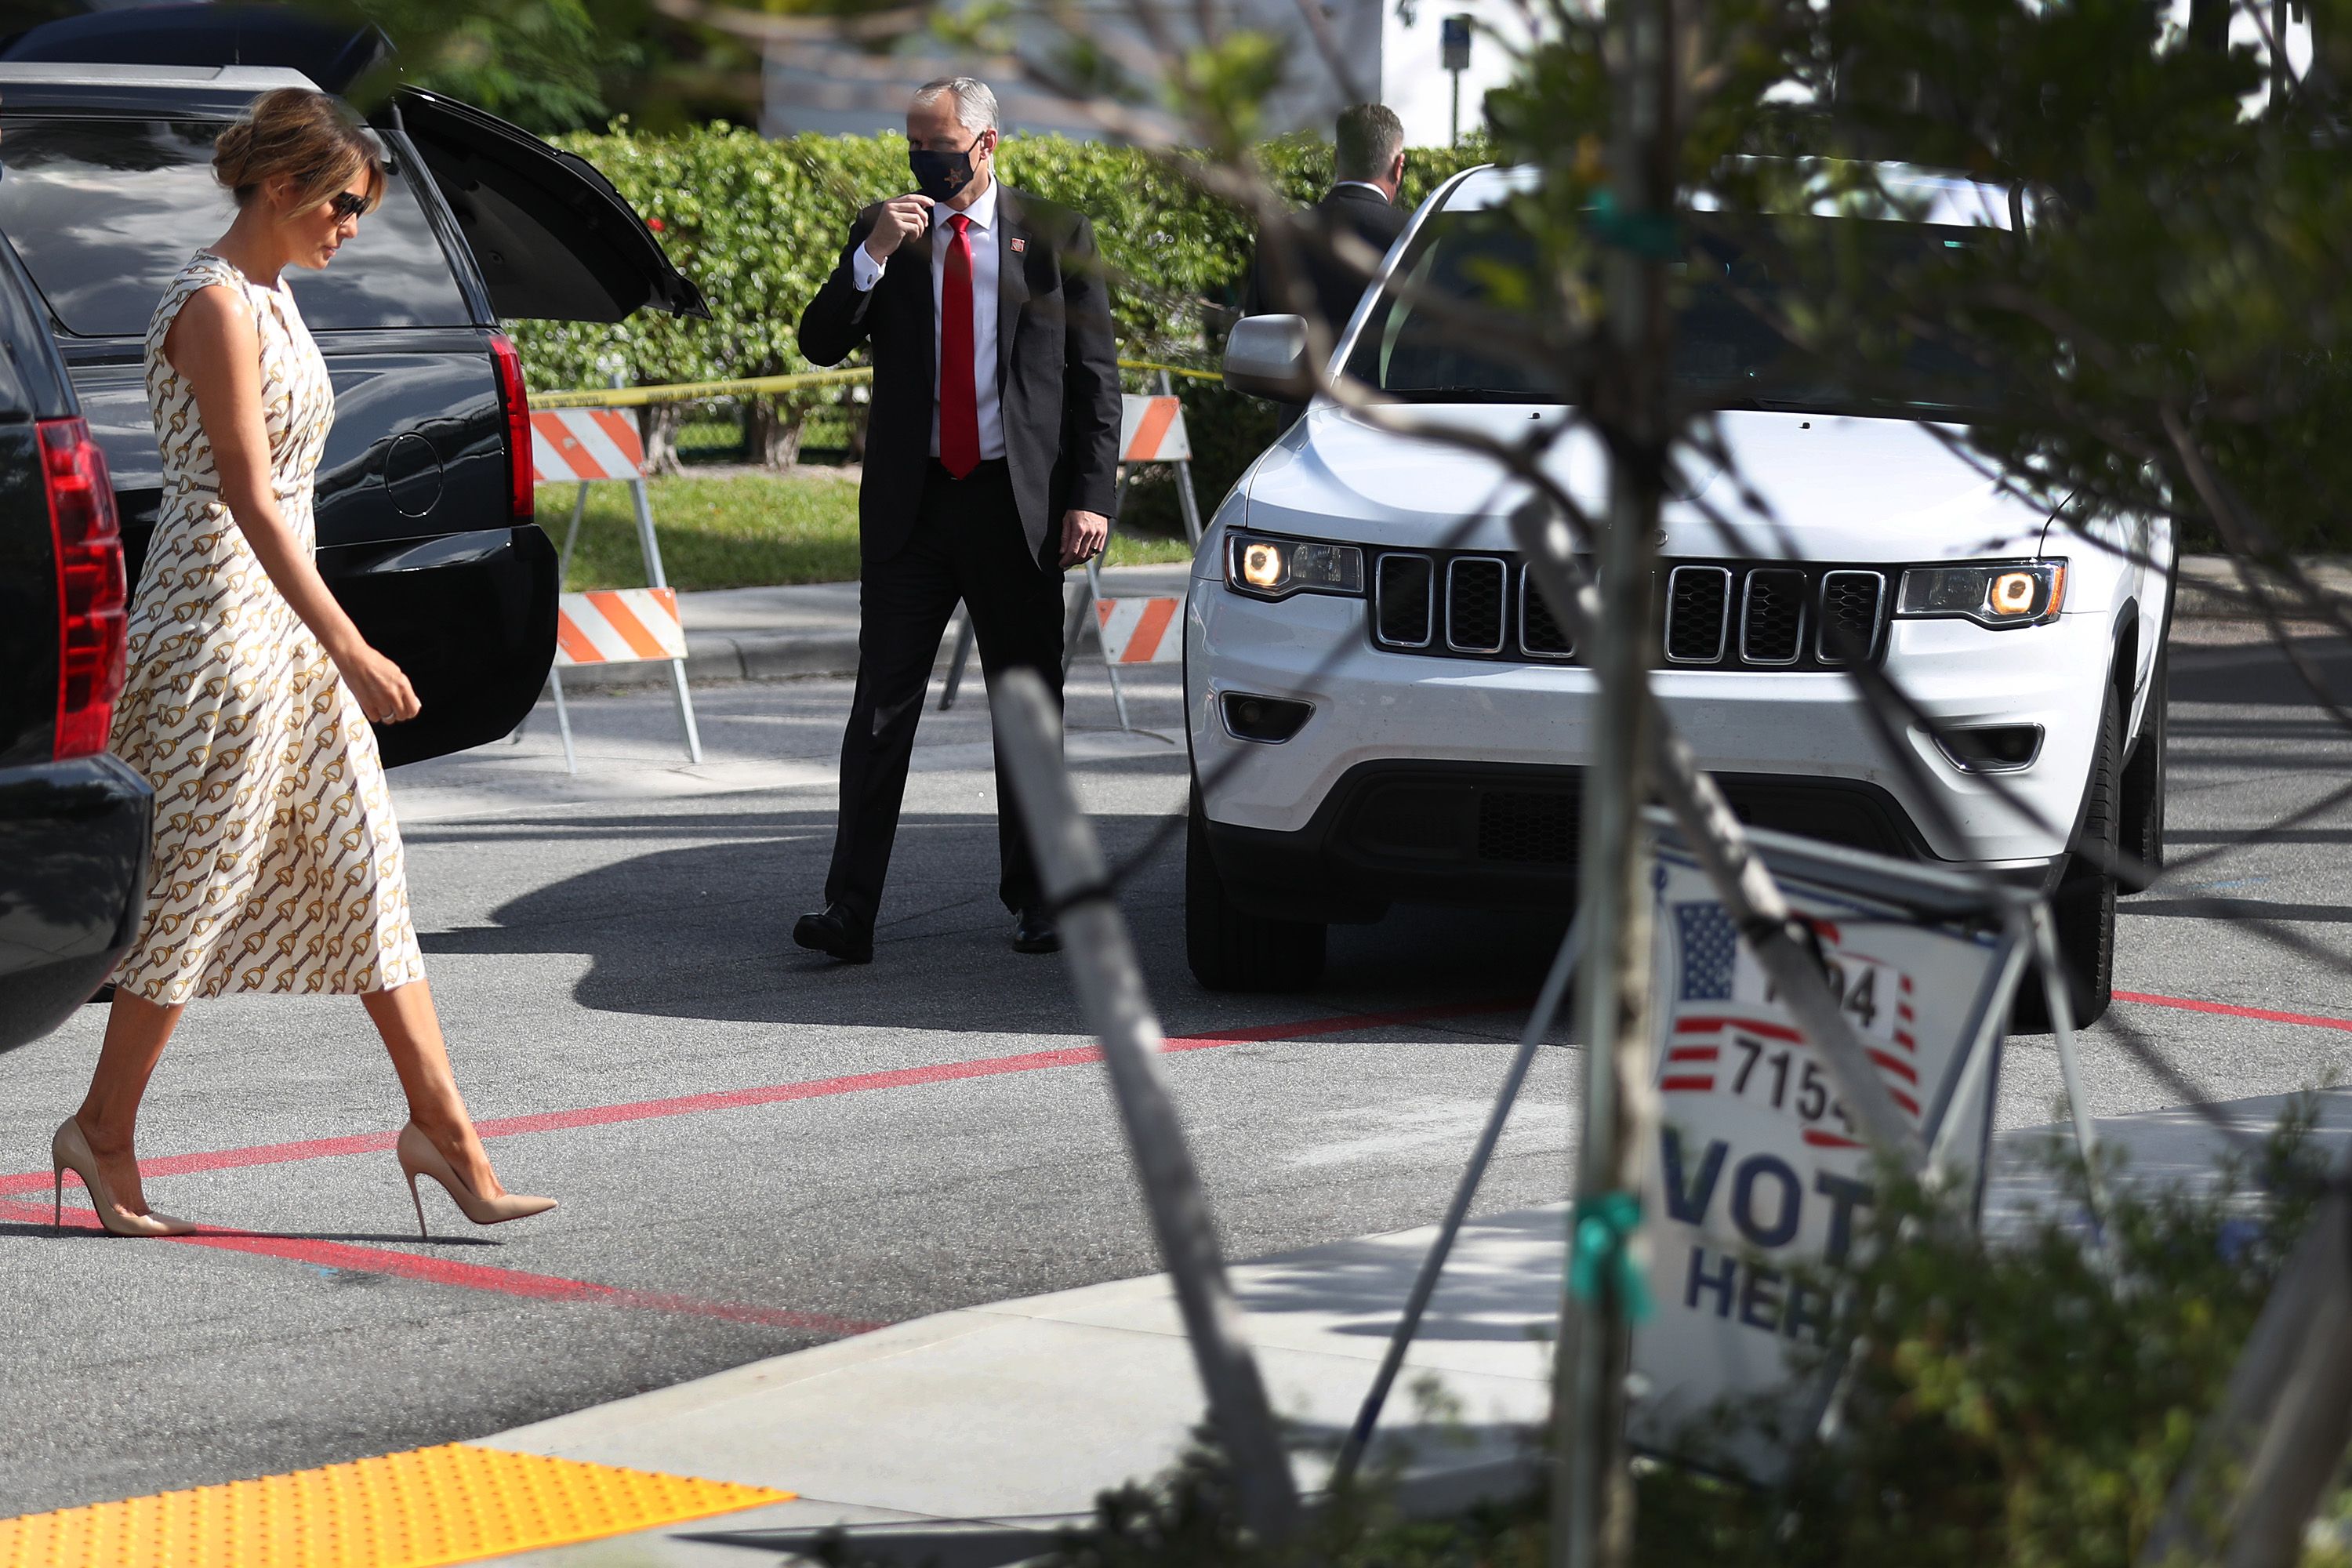 First lady Melania Trump arrives to cast her vote at the Morton and Barbara Mandel Recreation Center polling place on November 03, 2020 in Palm Beach, Florida